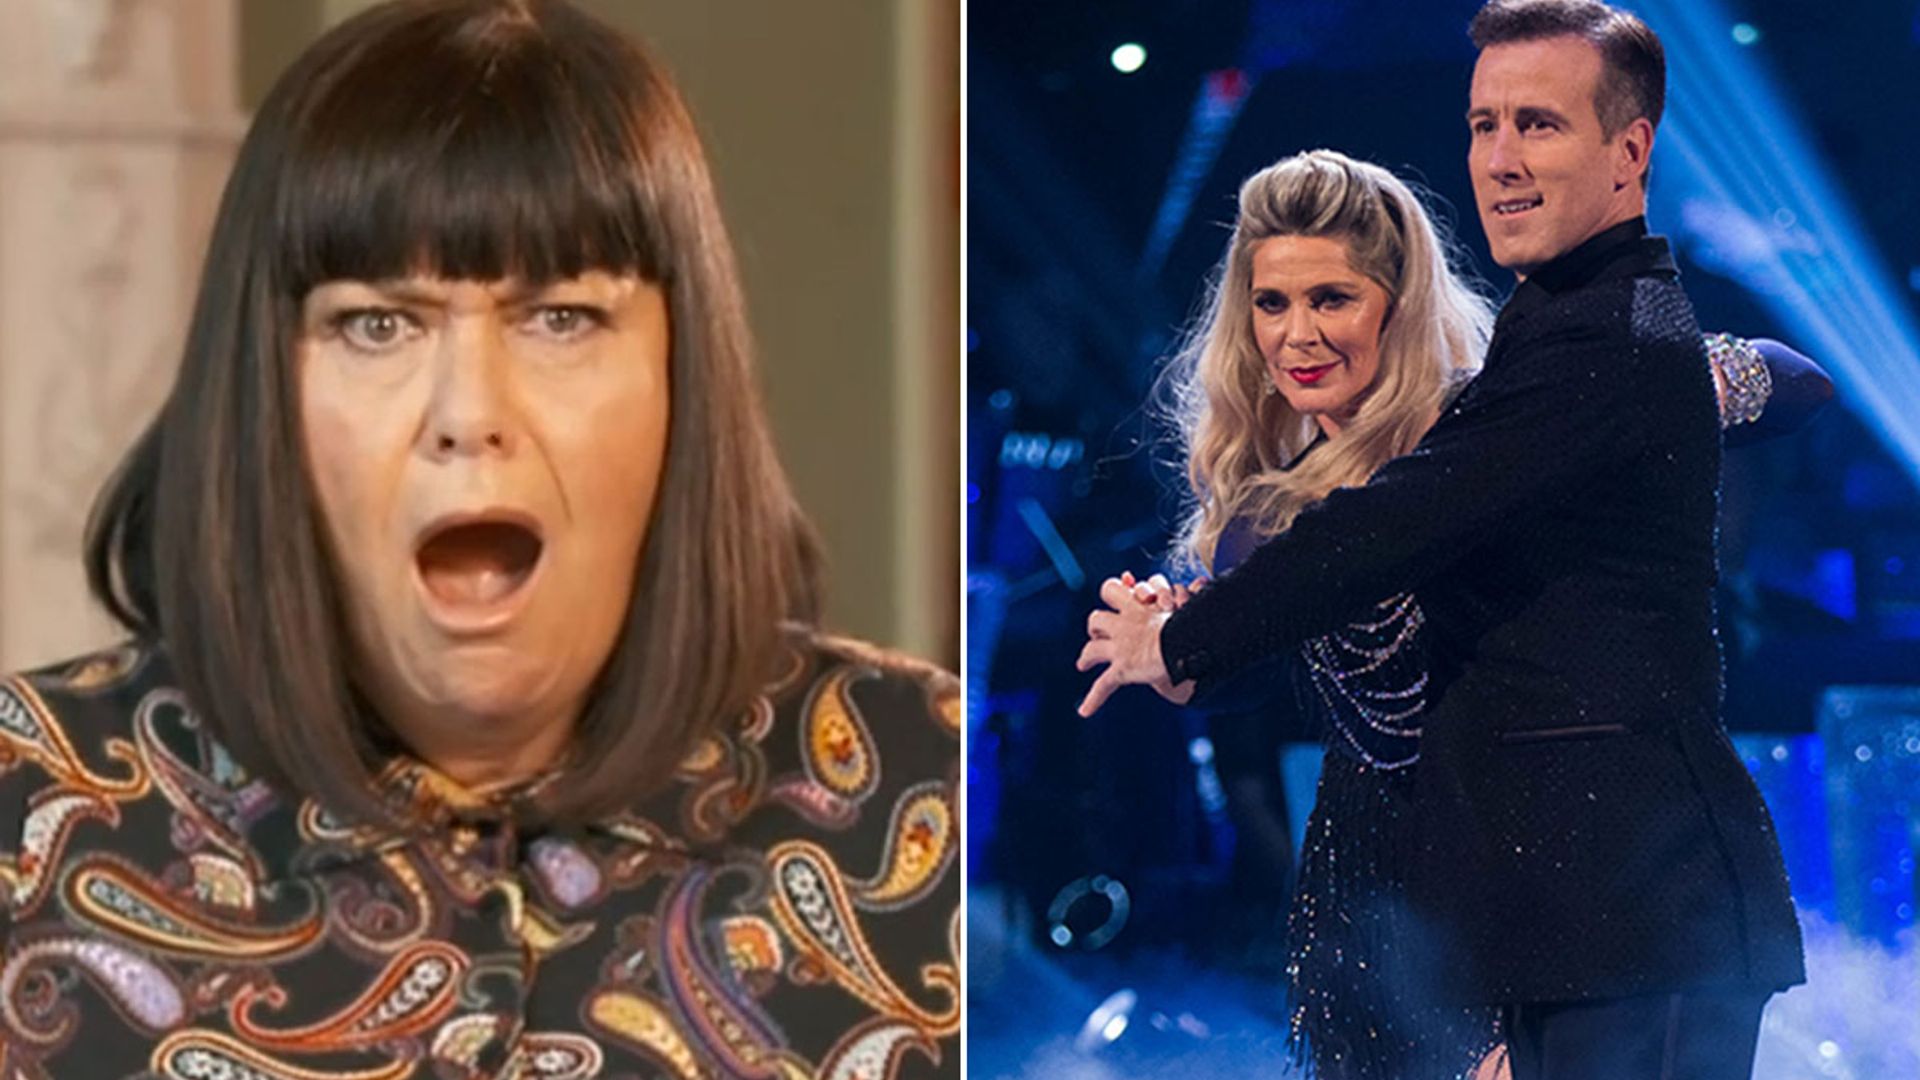 dawn french strictly comment